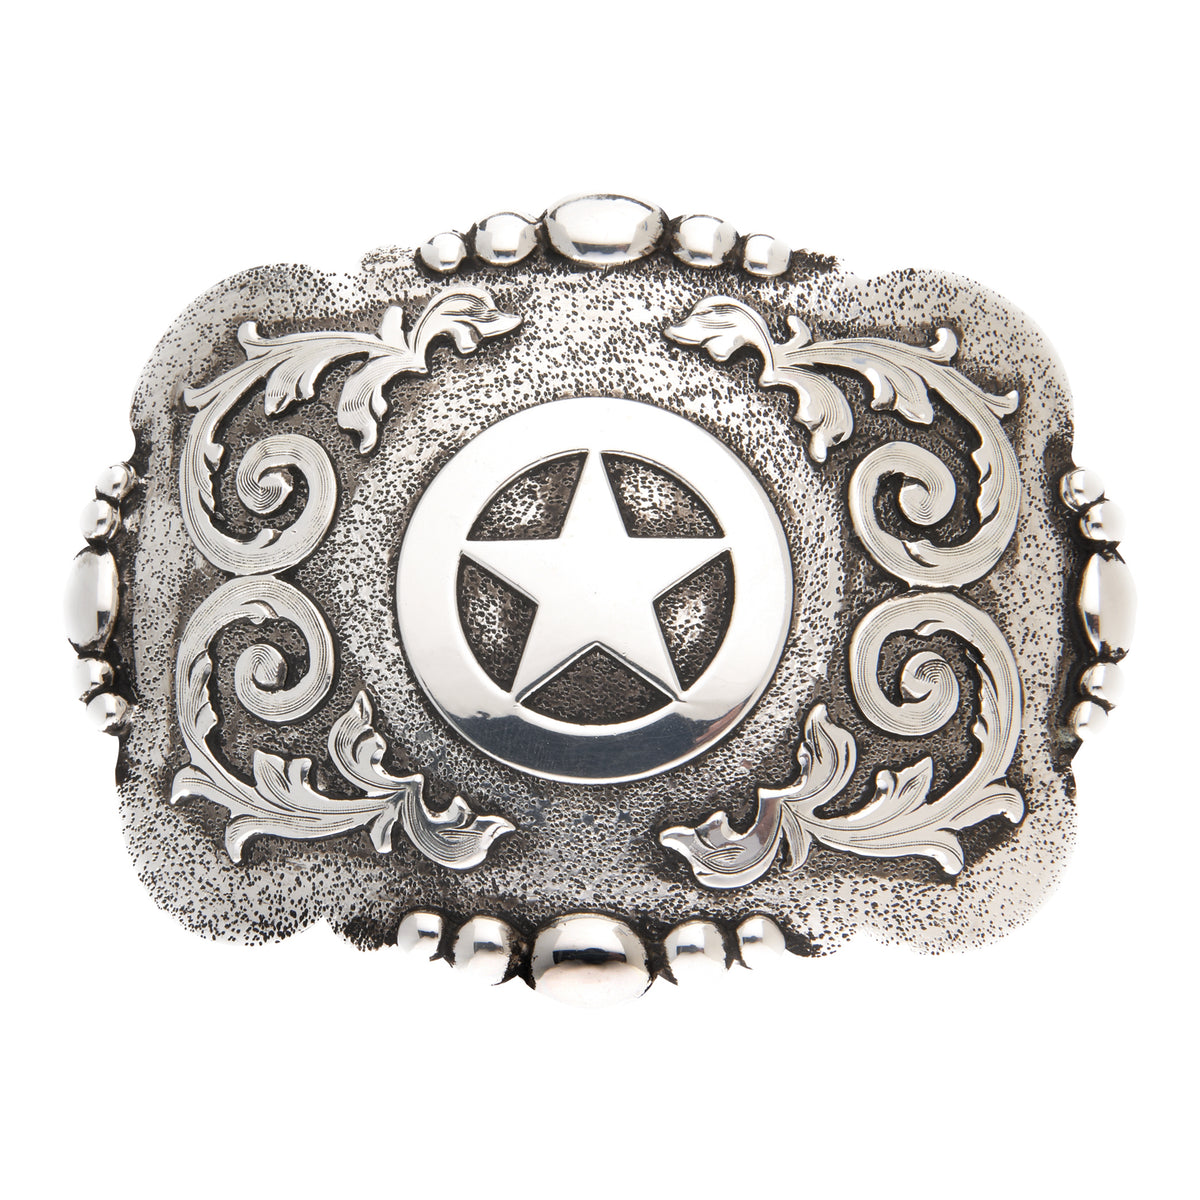 “Cabrillo” Texas Star with Etching and Scrolls Buckle